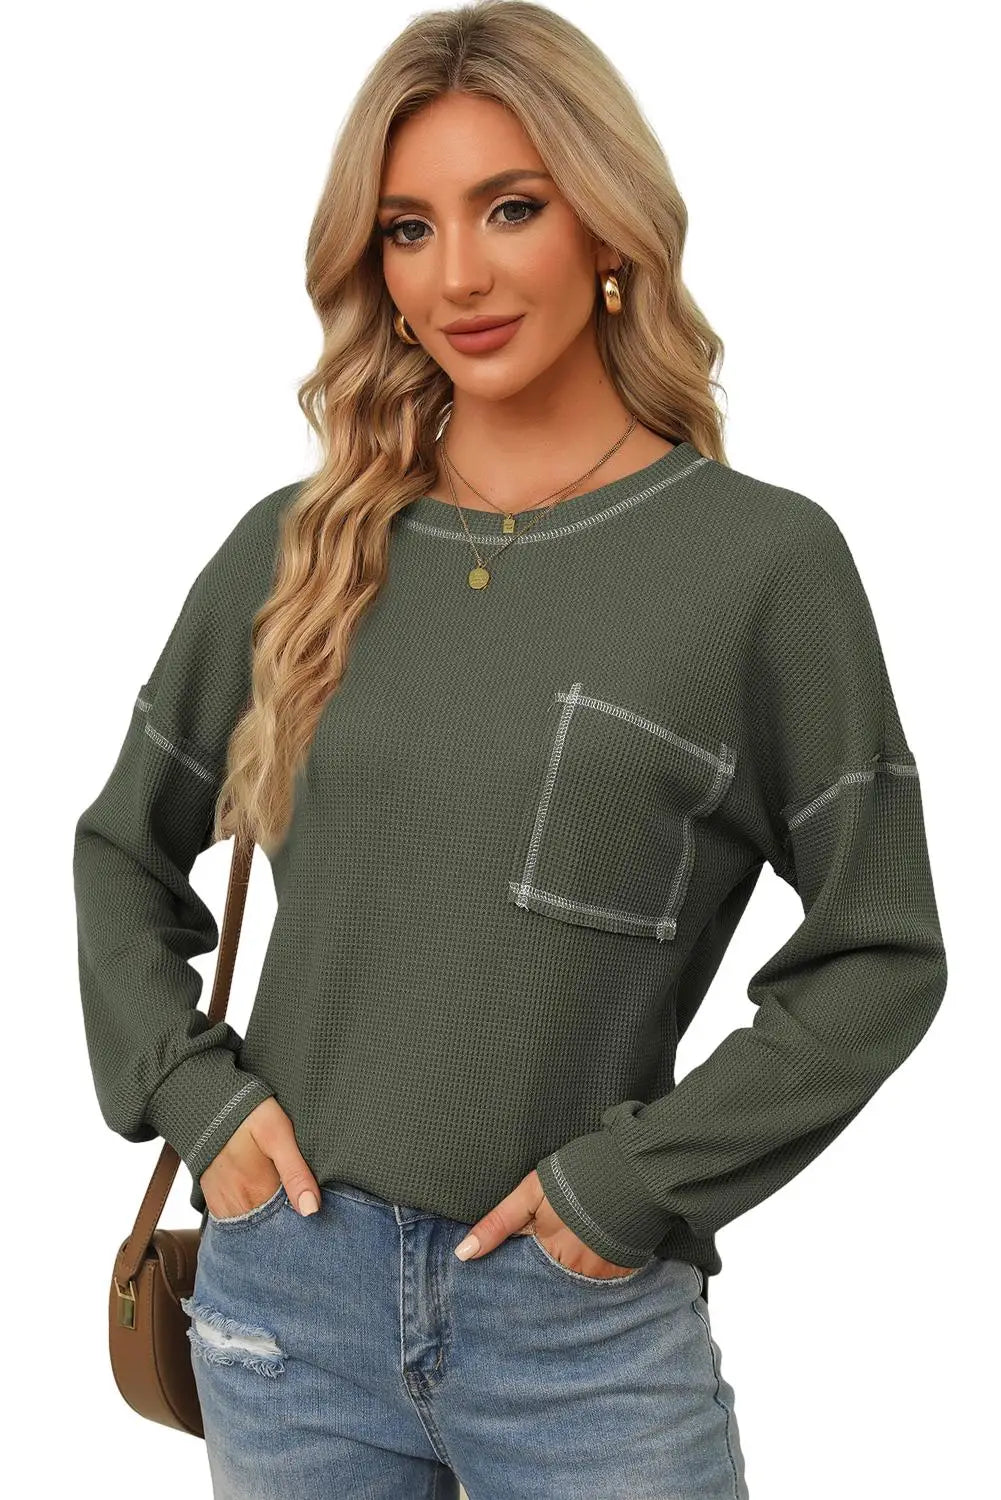 Mist Green Contrast Exposed Stitching Waffle Knit Blouse-9